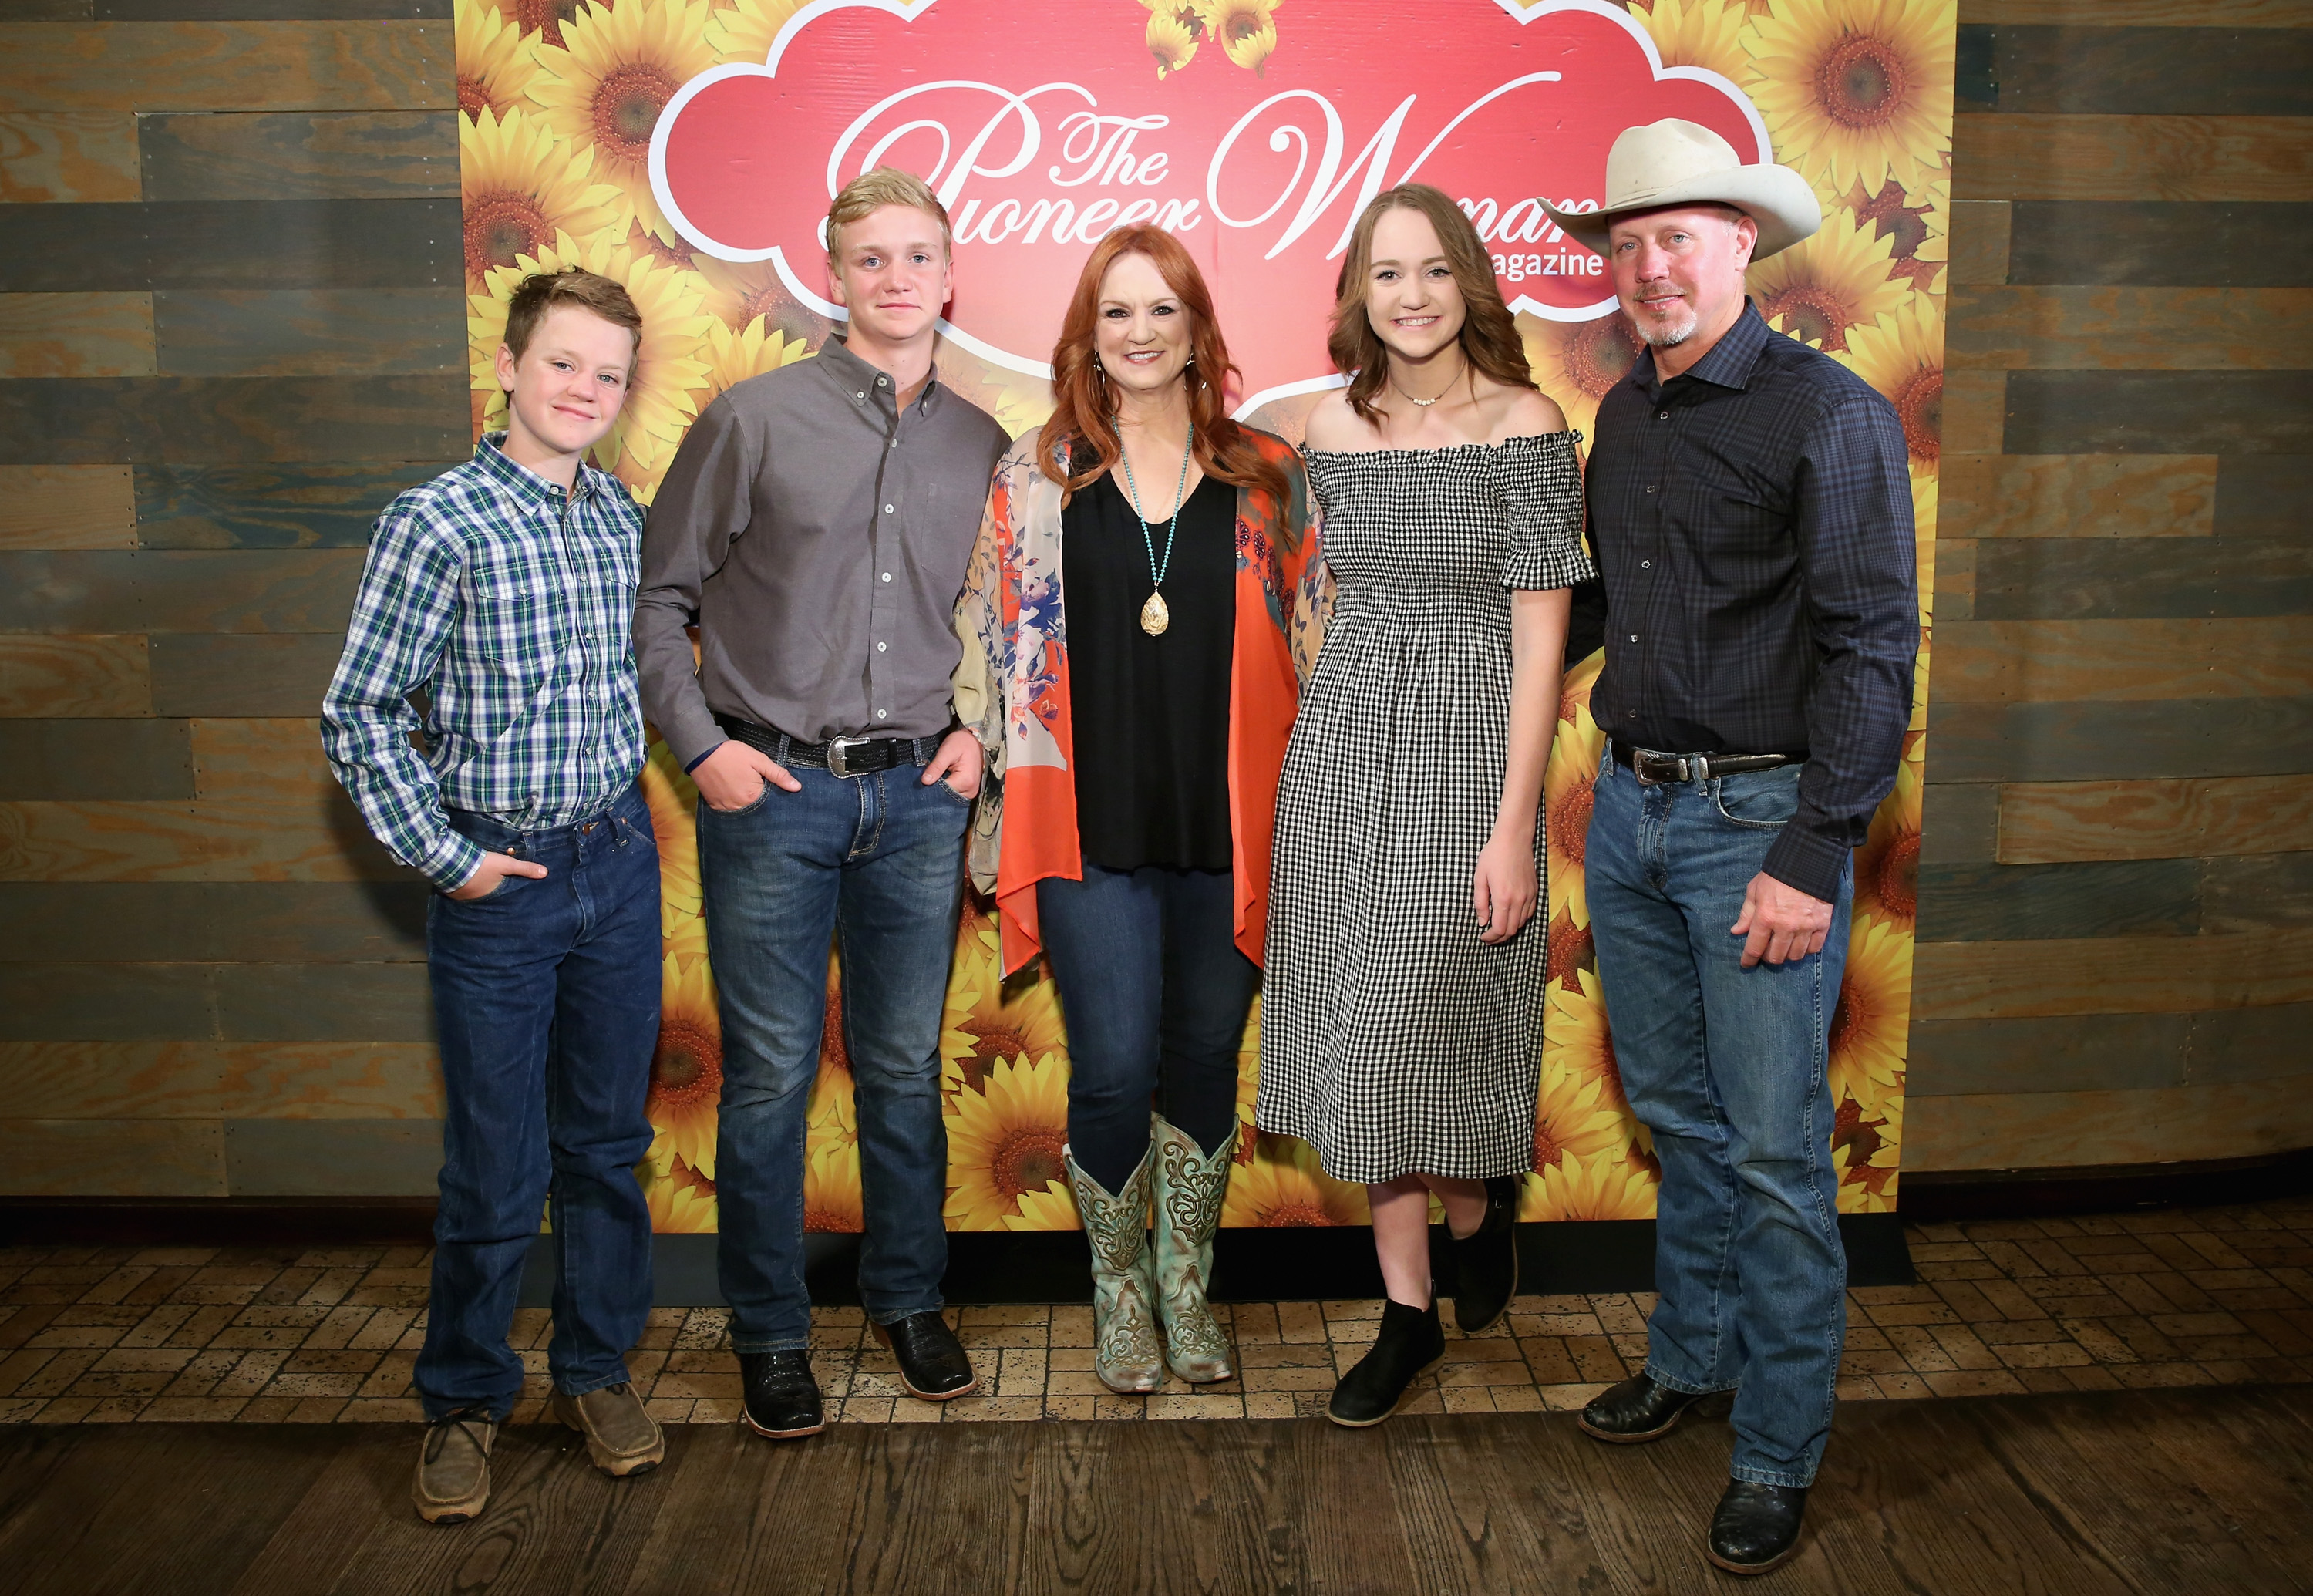 Ree Drummond, her husband Ladd Drummond and their children attend The Pioneer Woman Magazine Celebration at The Mason Jar on June 6, 2017, in New York City. | Source: Getty Images